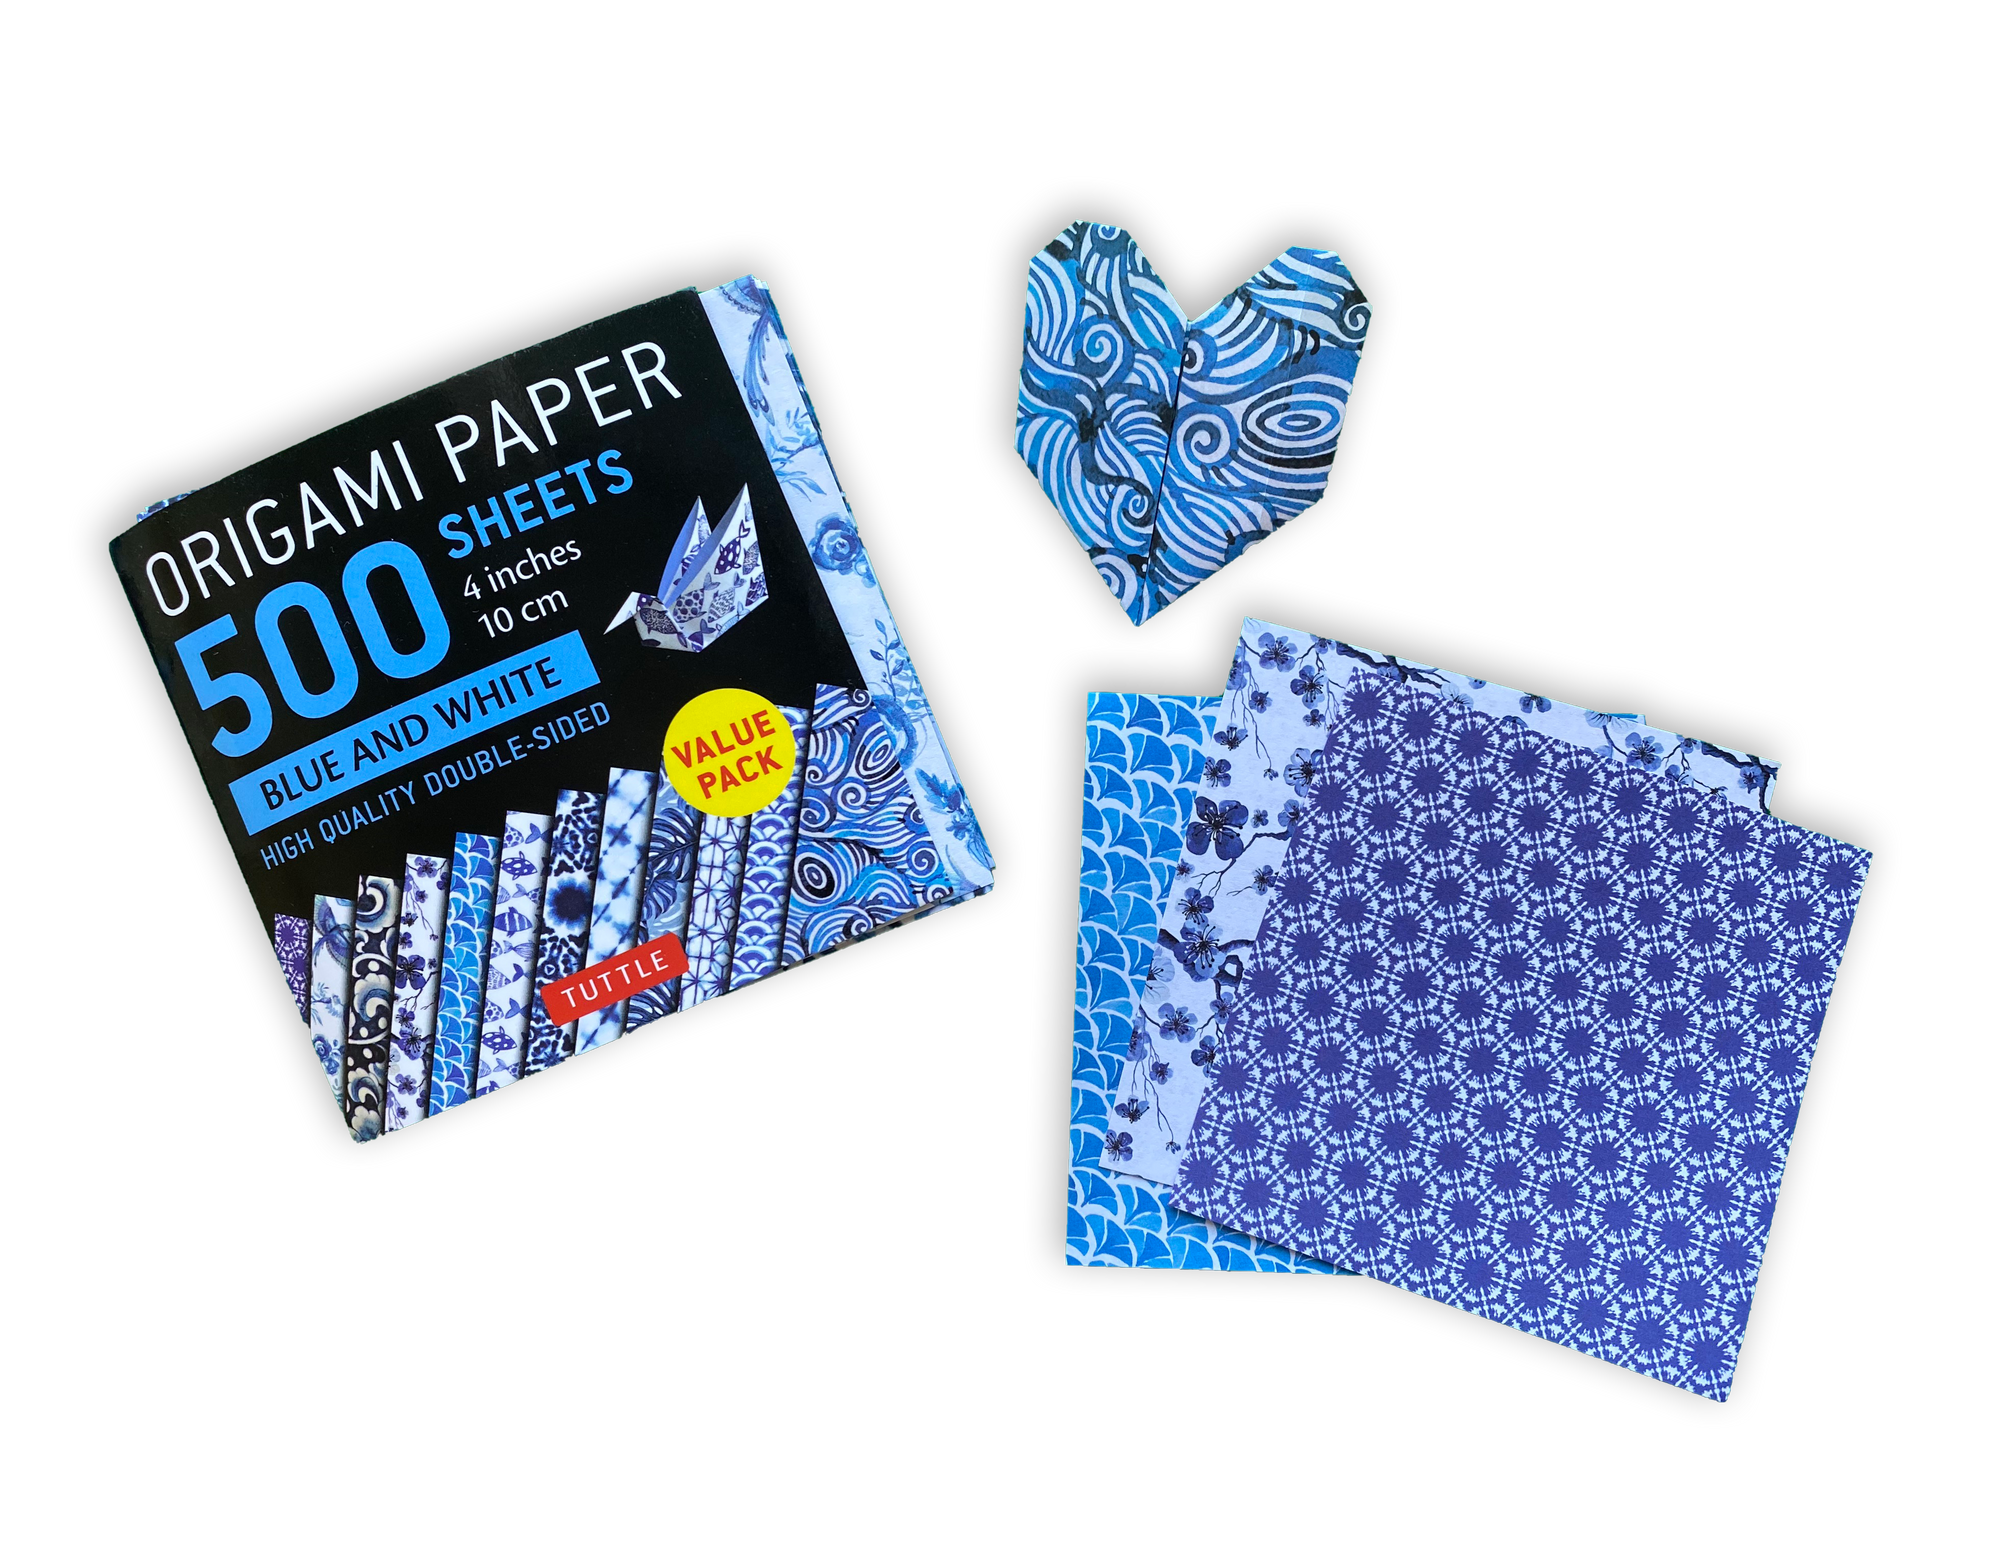 Origami Paper 500 Sheets Blue And White 4 10 Cm Tuttle Publishing